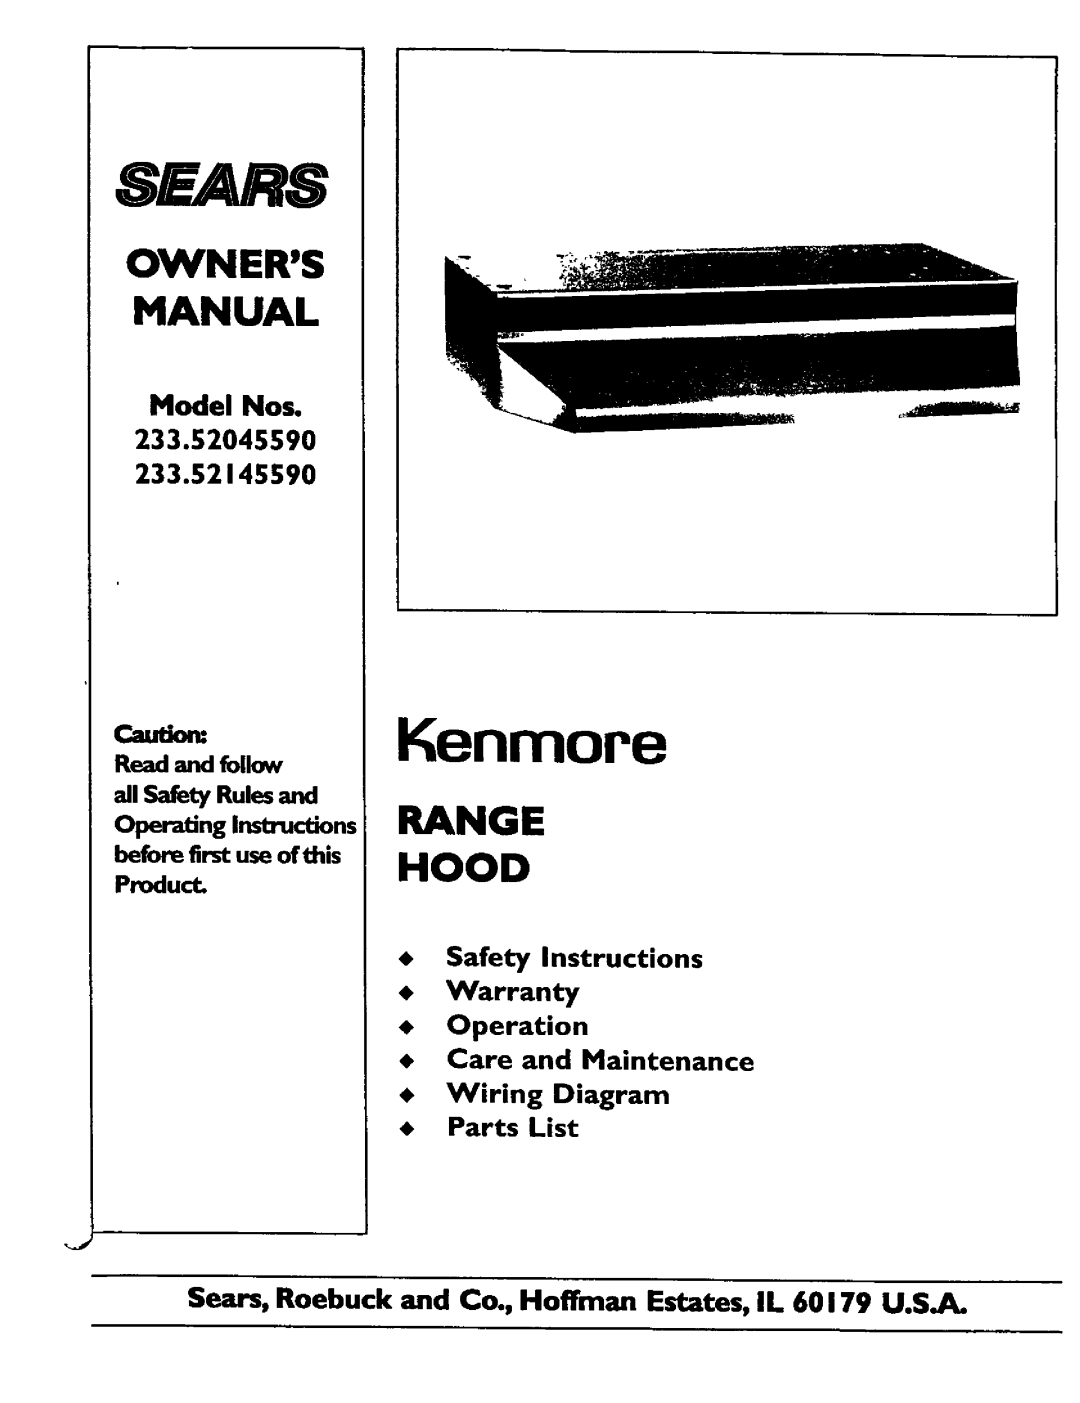 Kenmore 233.5214559 owner manual all Safety Rules and, Read and follow, before first use ofdlis Product, 8EARS, Kenmore 